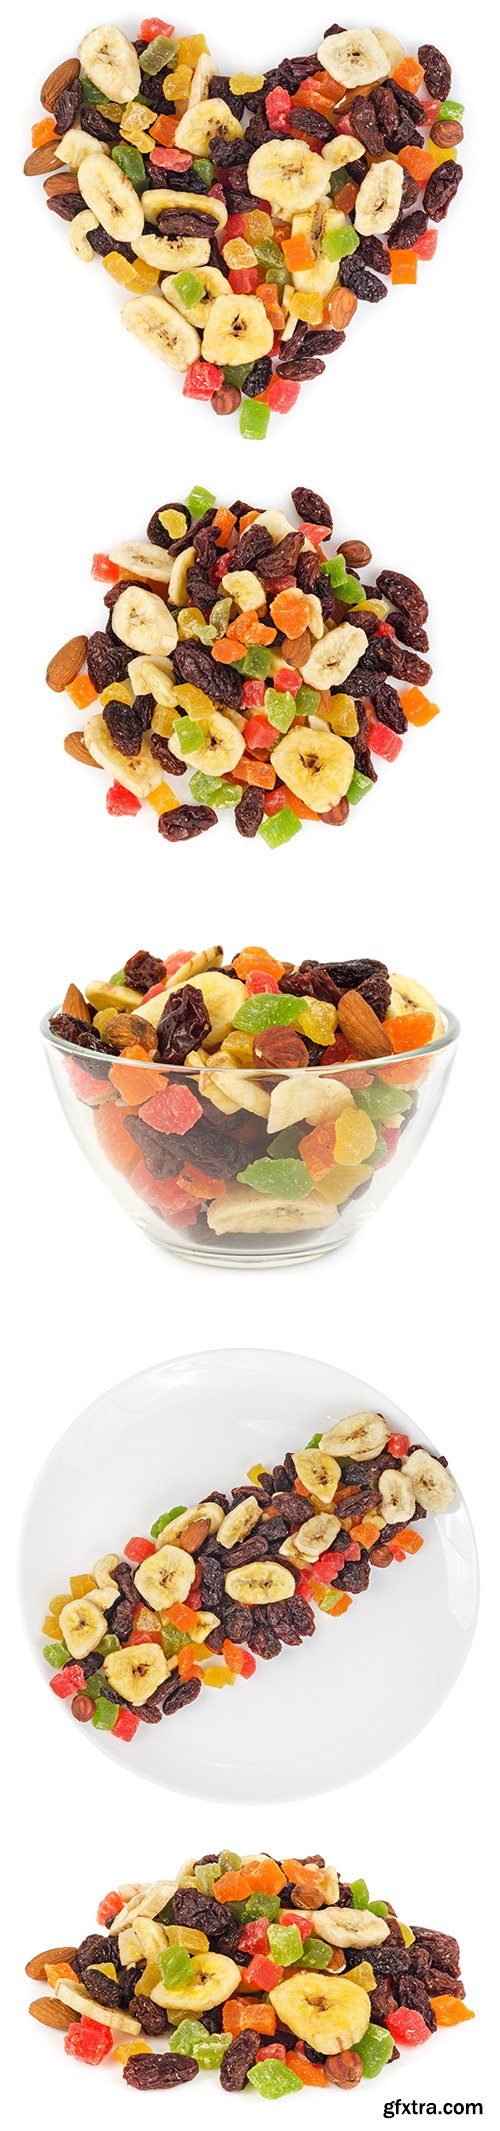 Dried Fruits Isolated - 7xJPGs